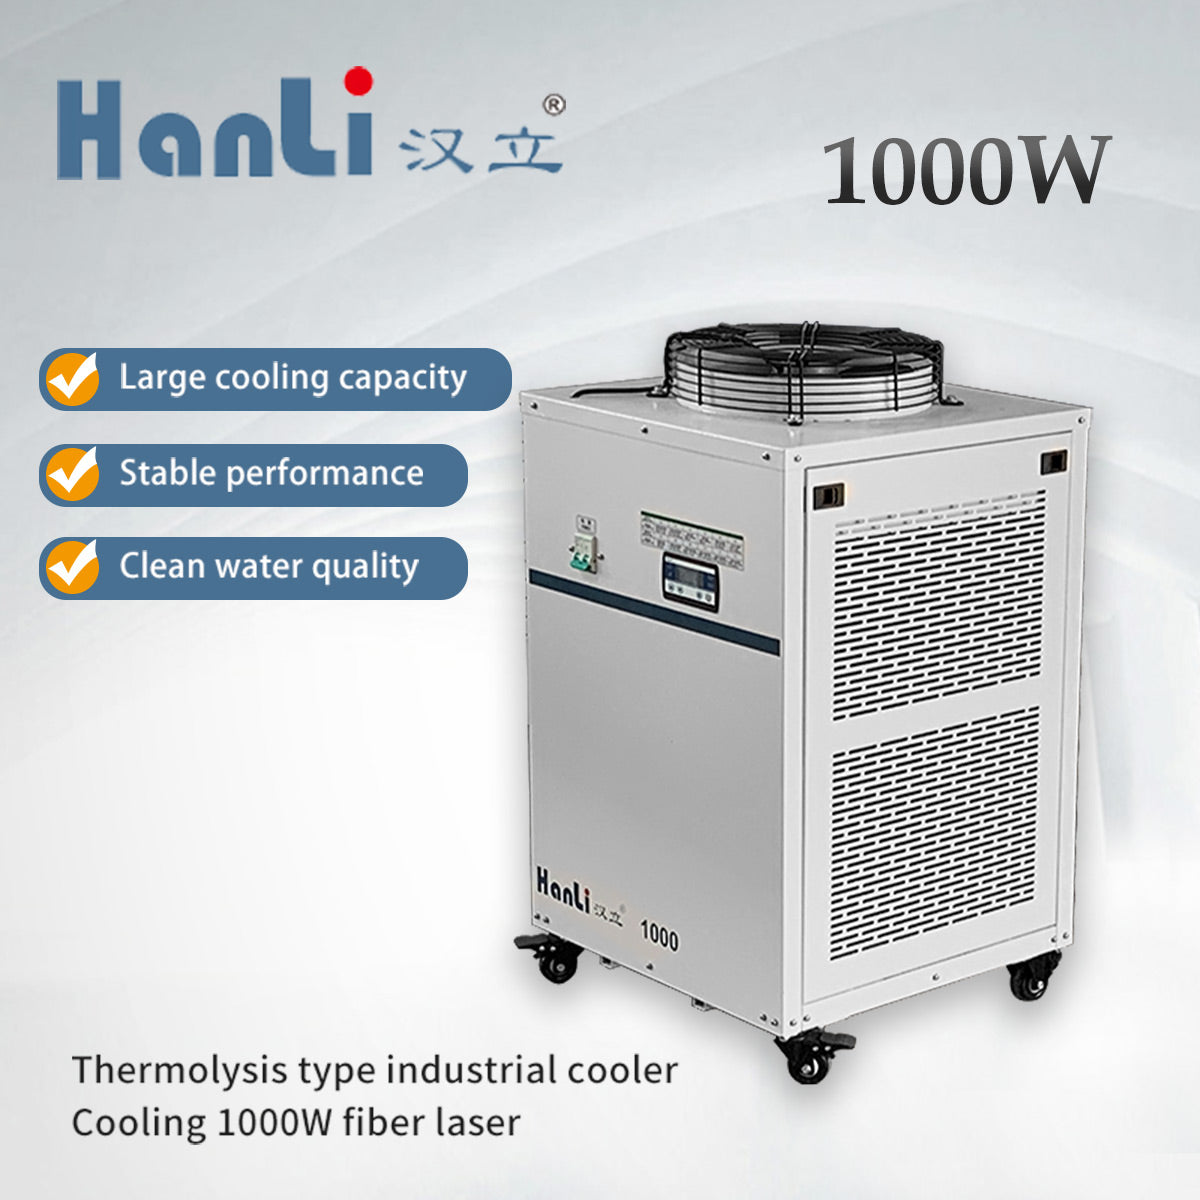 Startnow 2000W Industrial Laser System Cooled Water Chiller With Dual Temperature Control Circuit